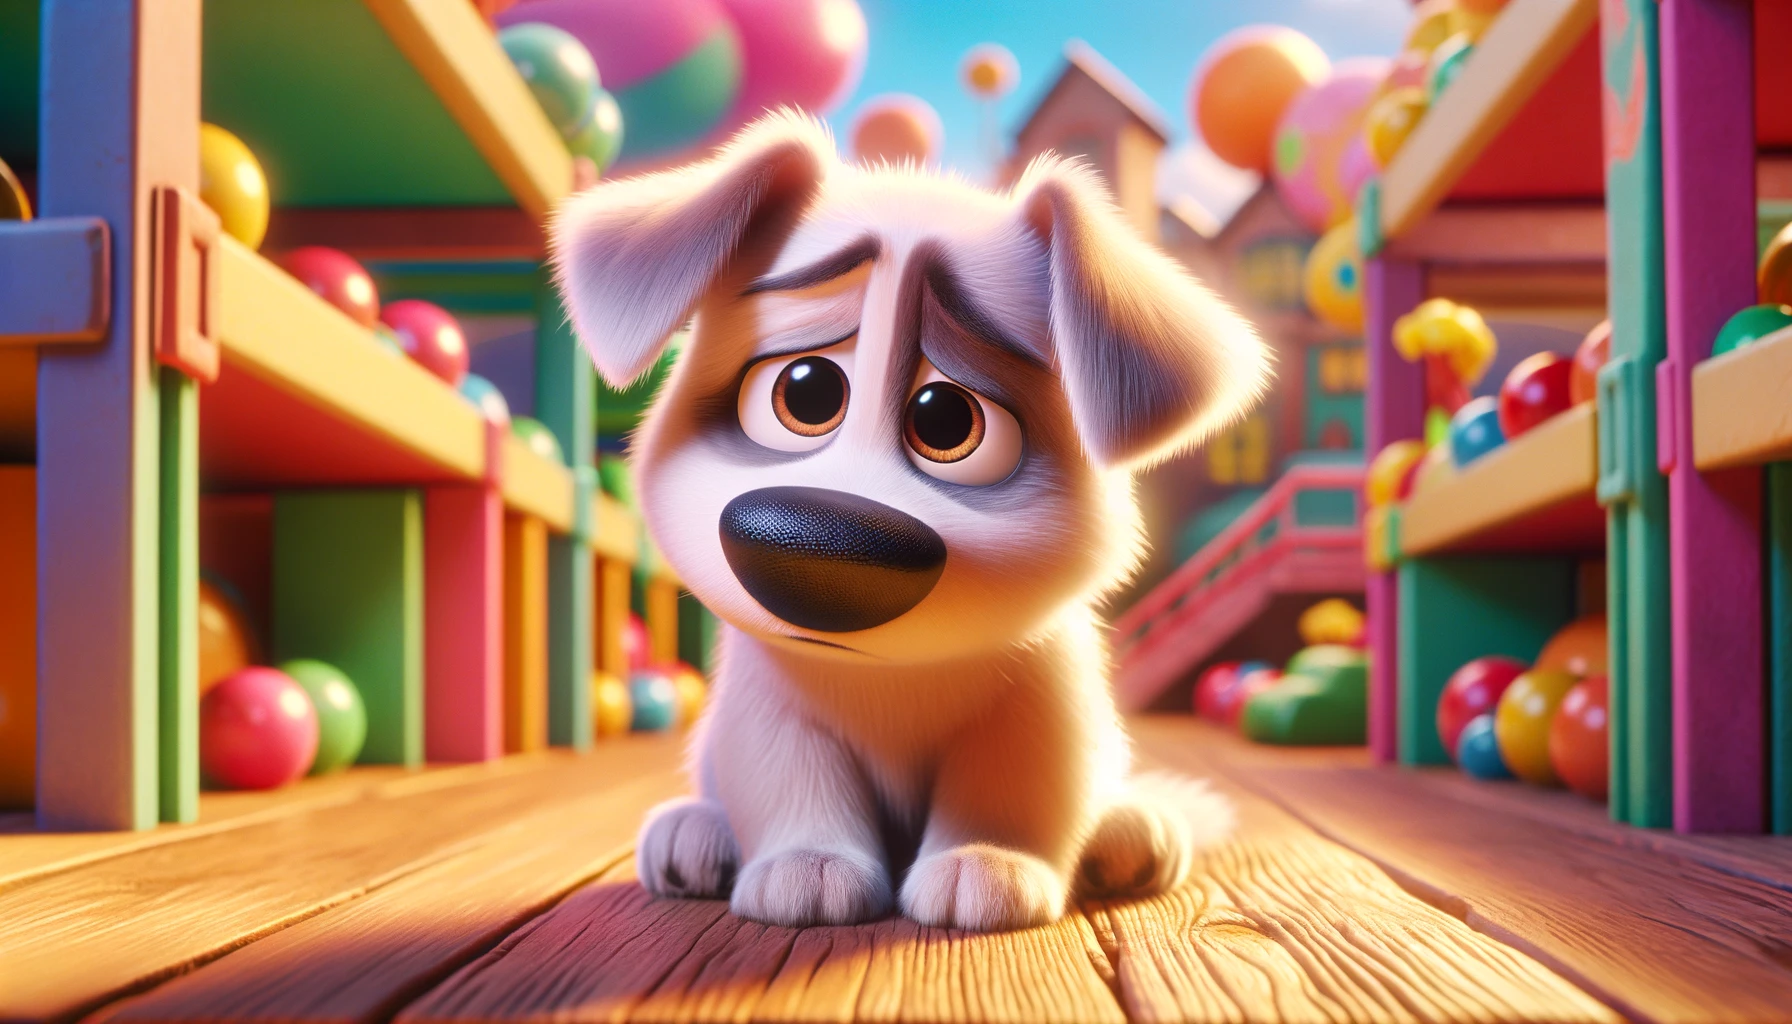 A cute dog with a hangdog air sits amid a vibrant, Pixar-style colorful backdrop, embodying a playful yet sad demeanor.